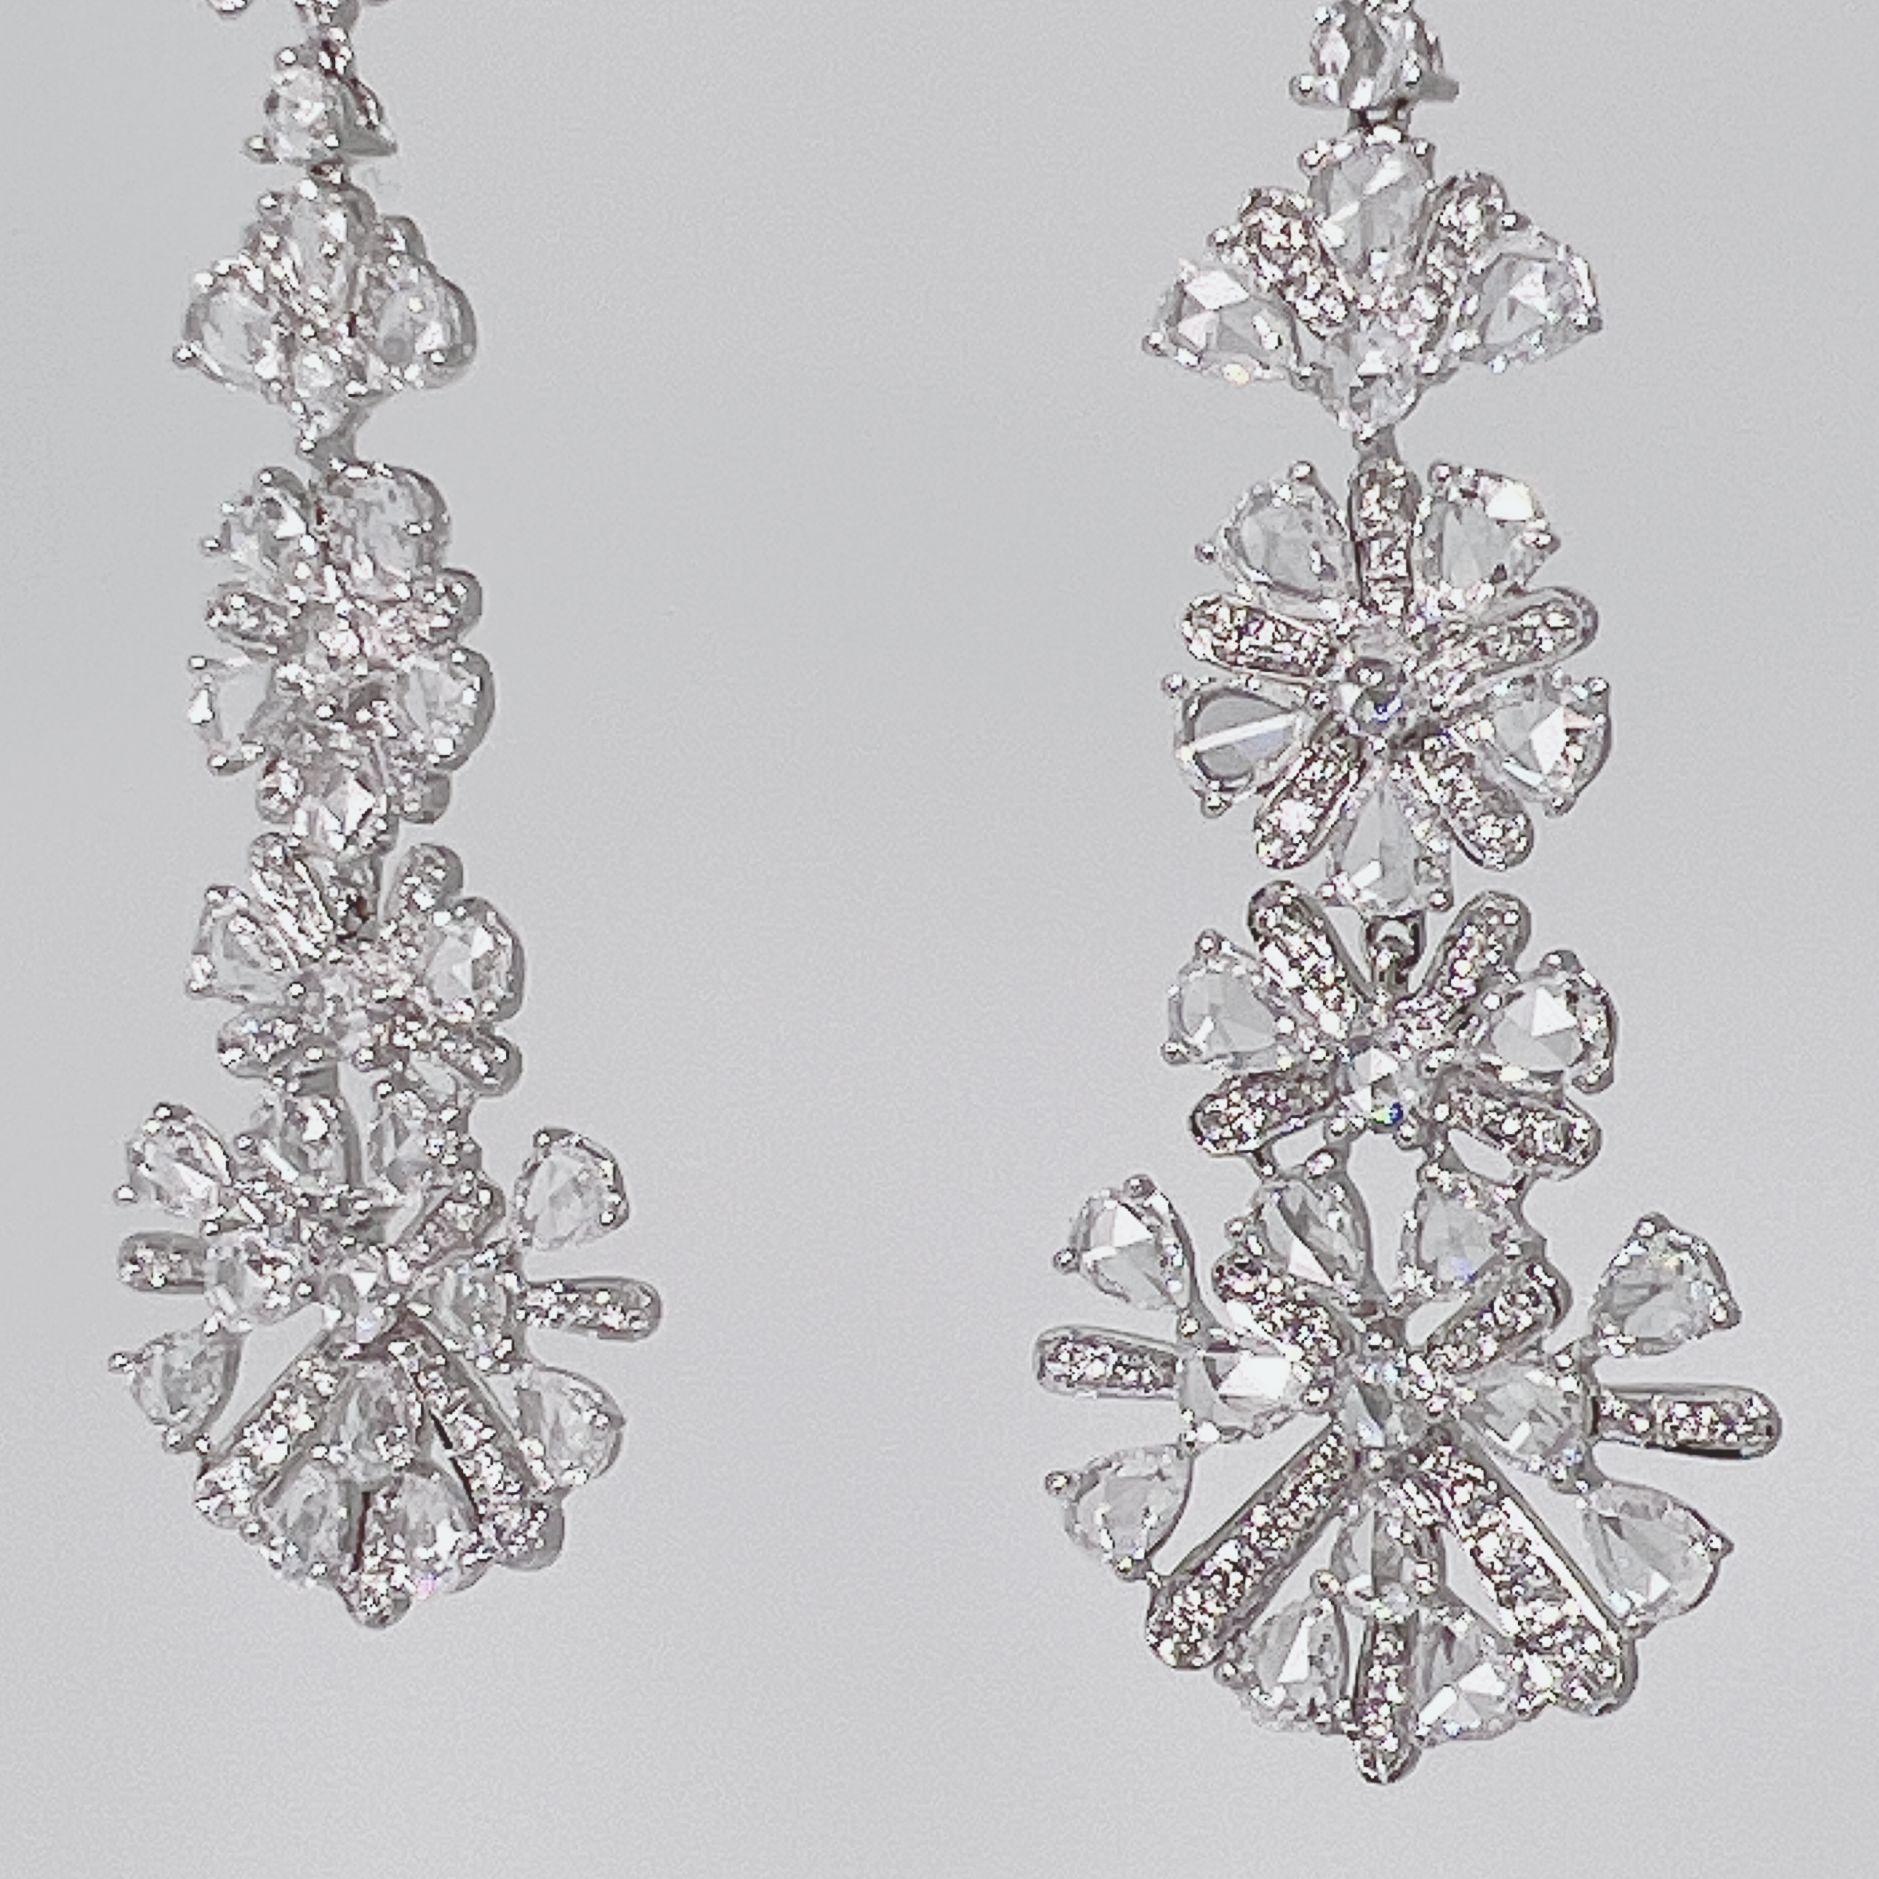 A stunning pair of dangling Snowflakes earrings featuring 202 pieces of Rose cut and Round Brilliant cut Diamonds weighing 8.95 carats.  Earrings are set on 18 Karat White Gold and is crafted with top craftmanship.  This stylish and unique piece